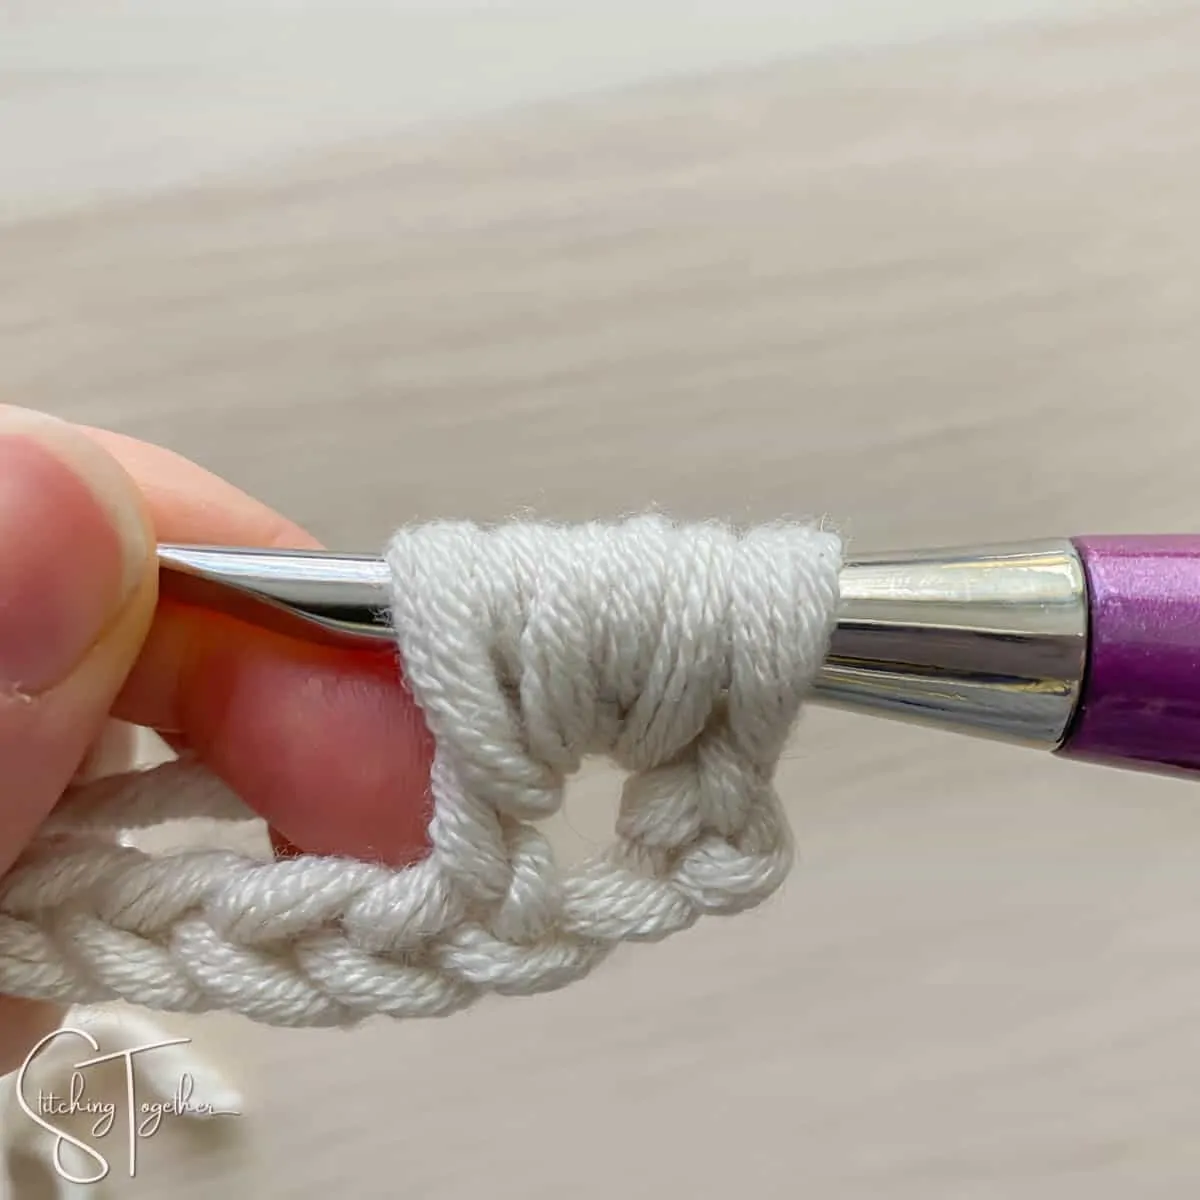 yarn over again, insert hook into same stitch and pull up a loop